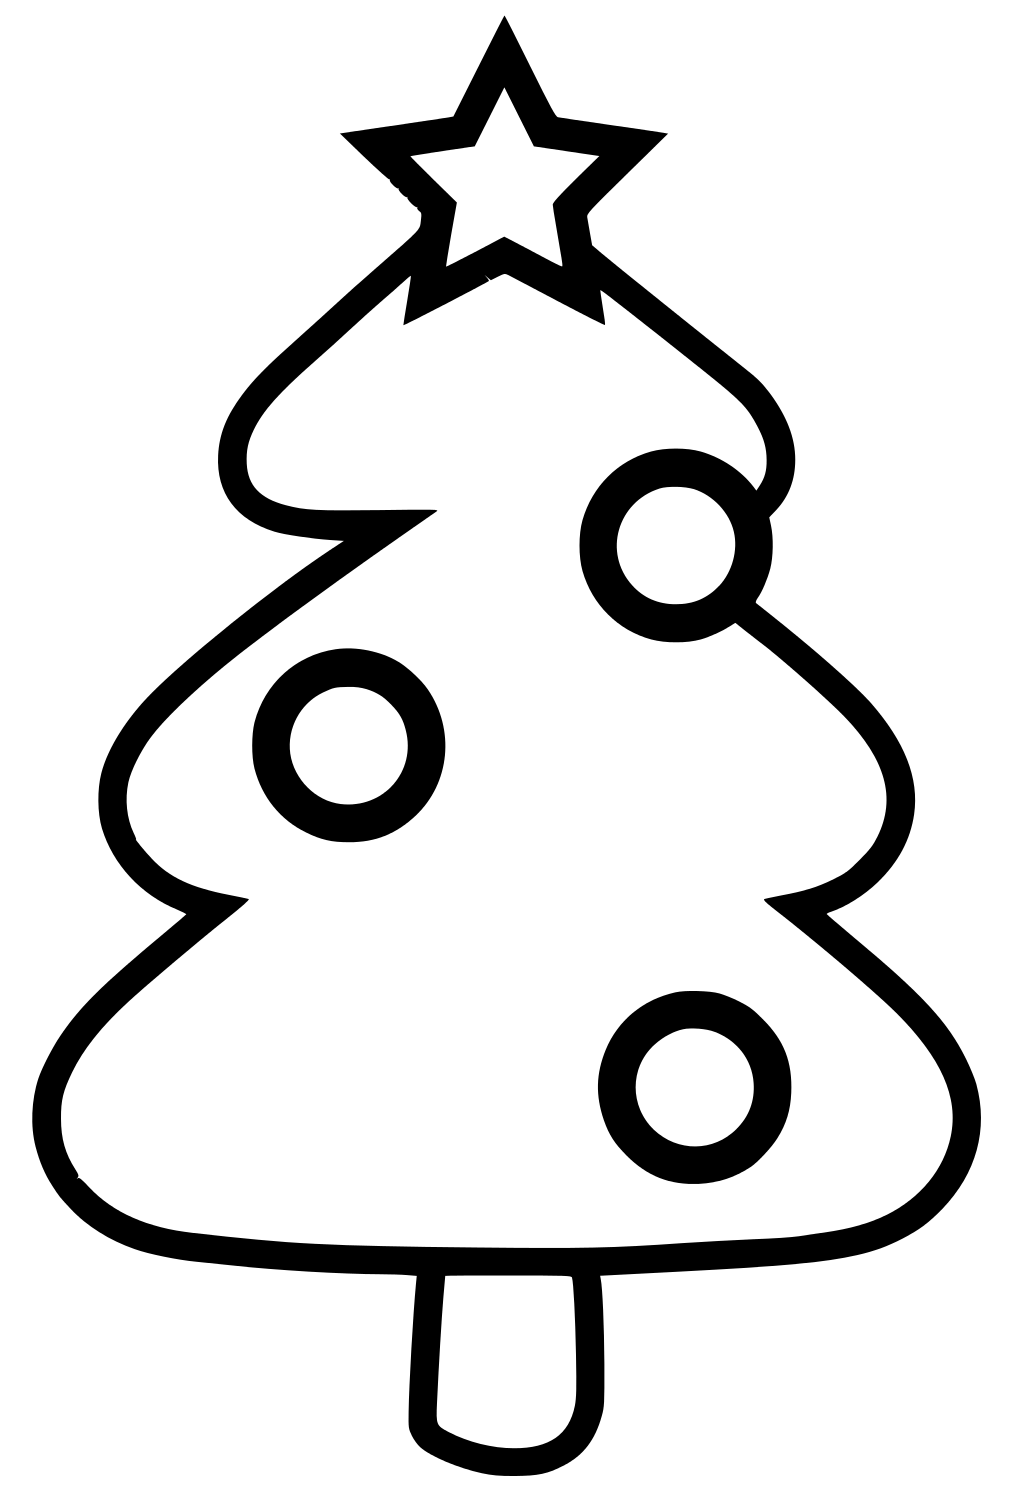 Simple Children Christmas Tree Coloring Page